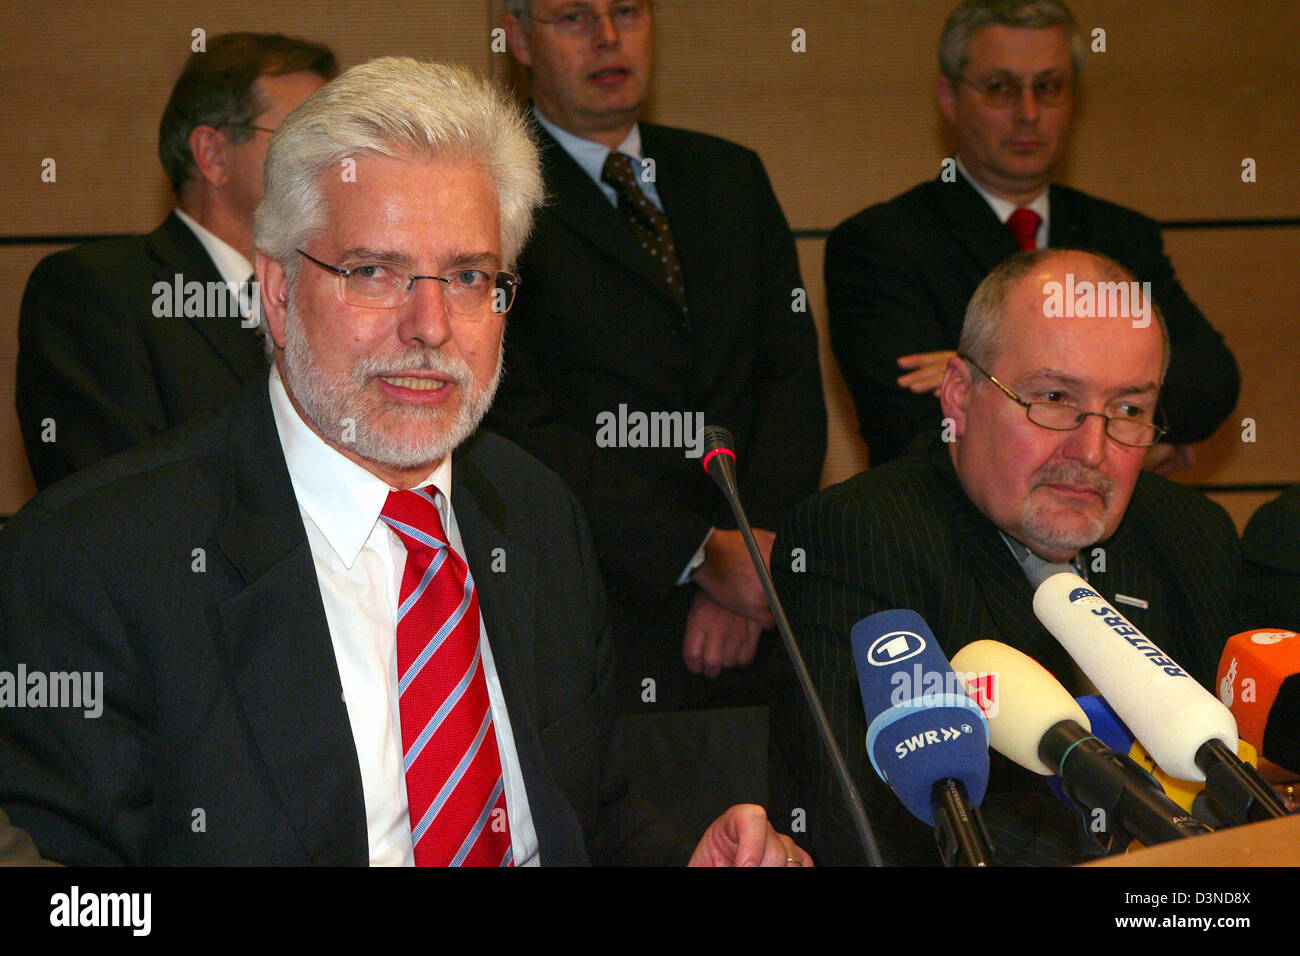 The negotiator for public employers Gerhard Widder (R) and ver.di labour union negotiator Alfred Wohlfahrt (L) talk to the press during a press conference in Stuttgart, Germany, Wednesday, 05 April 2006. With municipalities stubborn, the strikers weary and the public fed up with uncollected rubbish and short-staffed kindergartens, negotiators agreed late Wednesday on a modest rise  Stock Photo